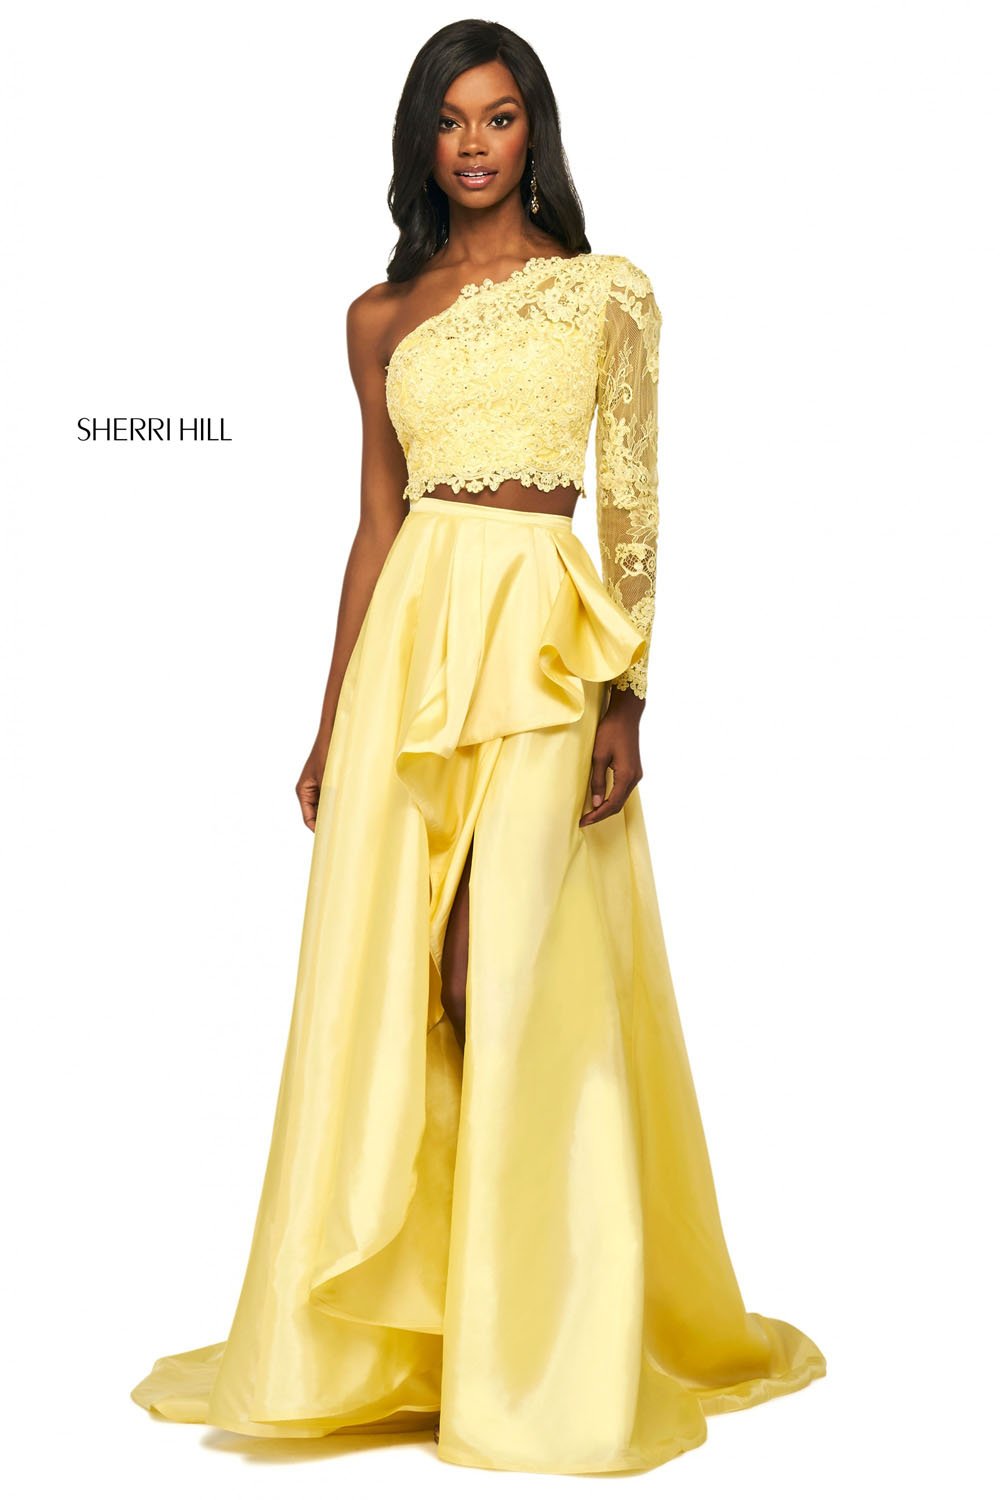 Sherri Hill 53771 dress images in these colors: Red, Candy Pink, Yellow, Light Blue, Ivory, Aqua, Coral, Black.